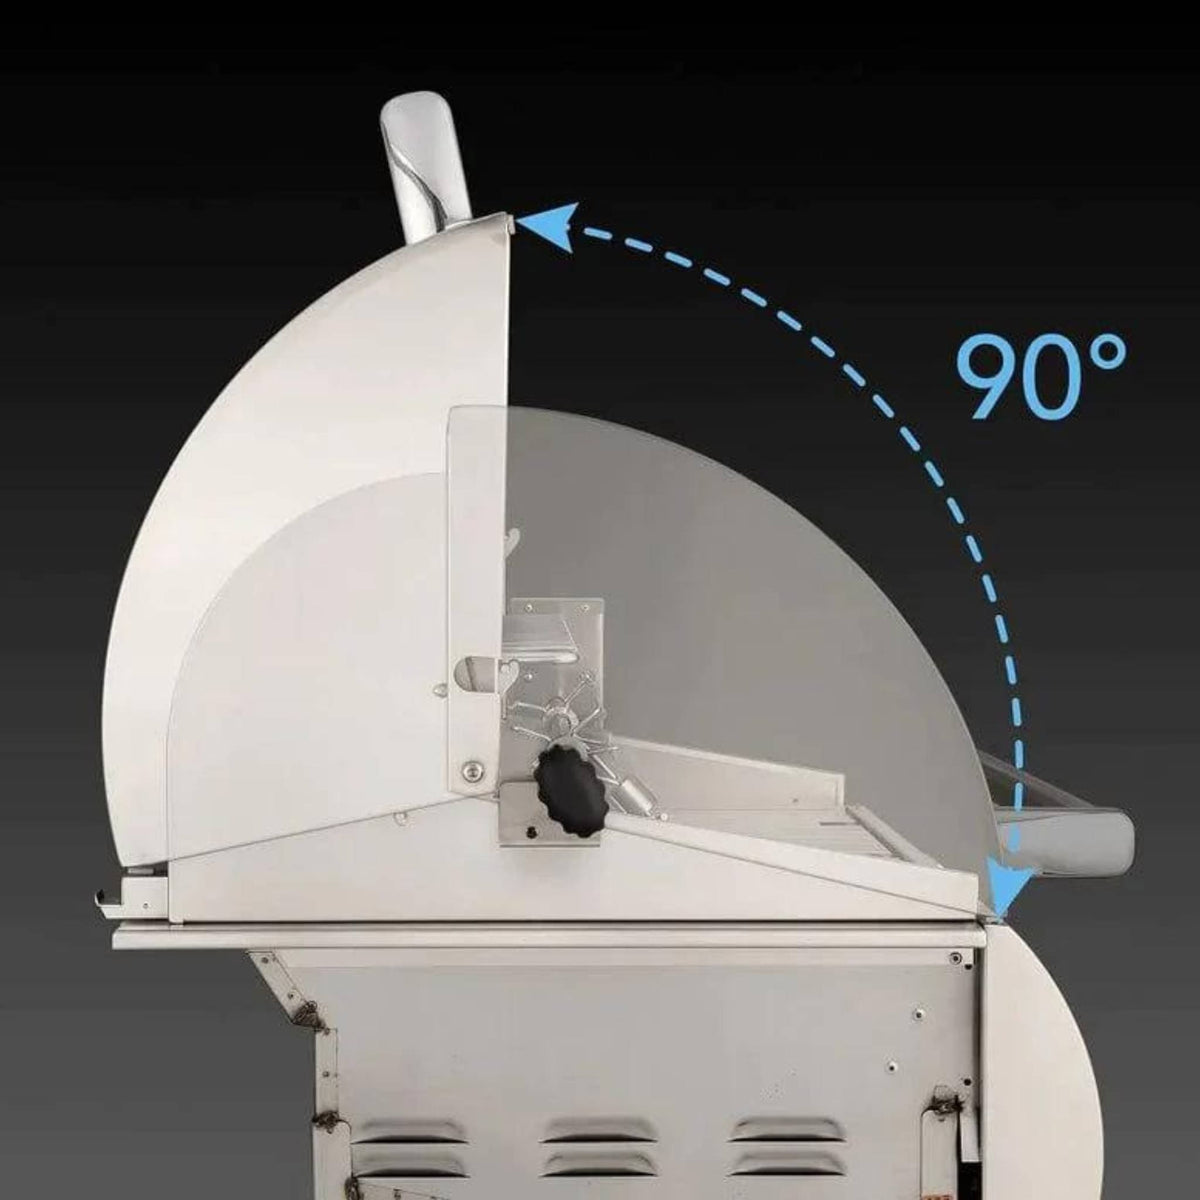 Fire Magic Echelon Diamond 36&quot; Portable Grill with Analog Thermometer &amp; Flush Mounted Single Side Burner